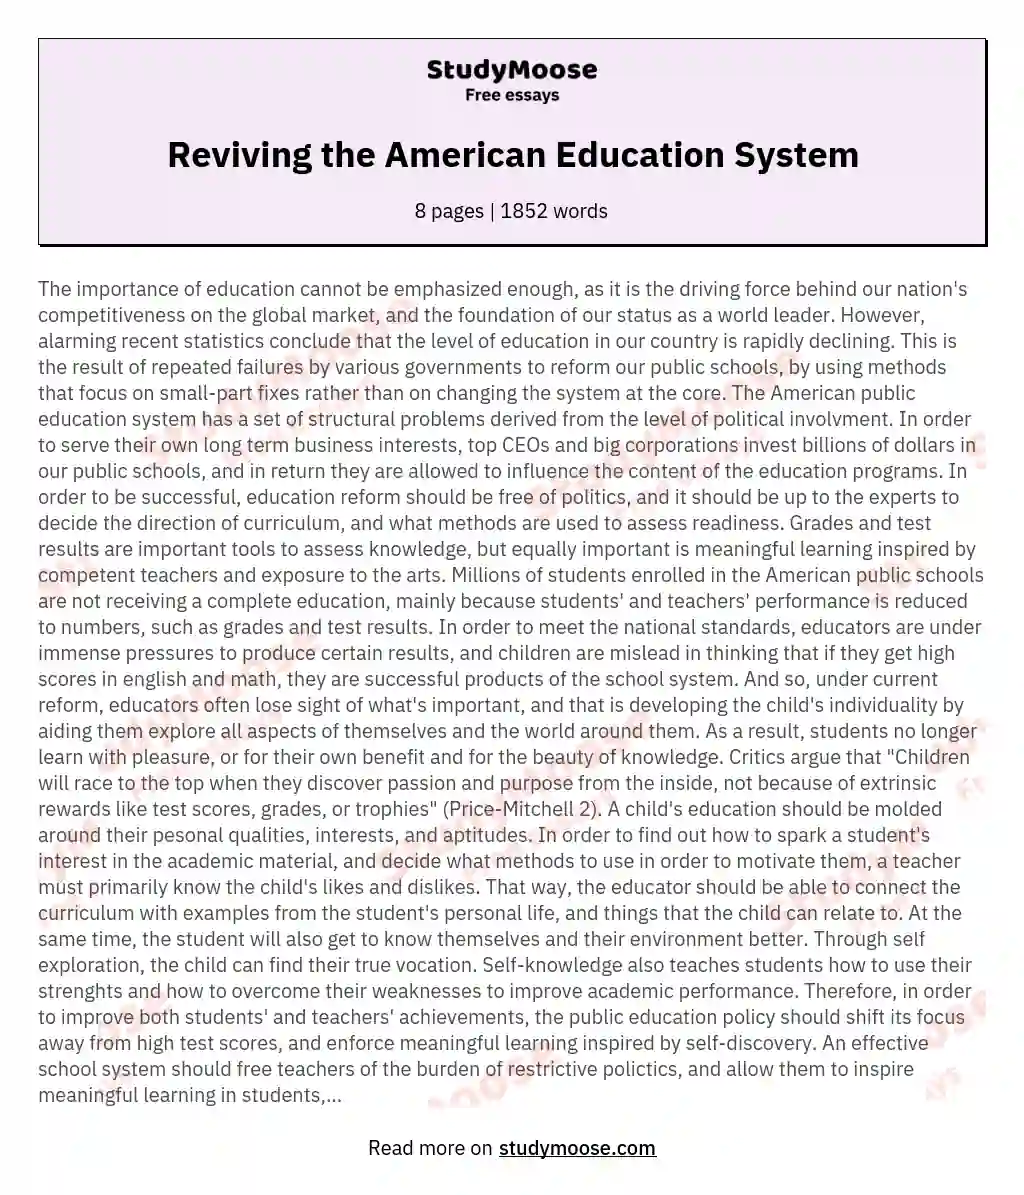 Reviving the American Education System essay